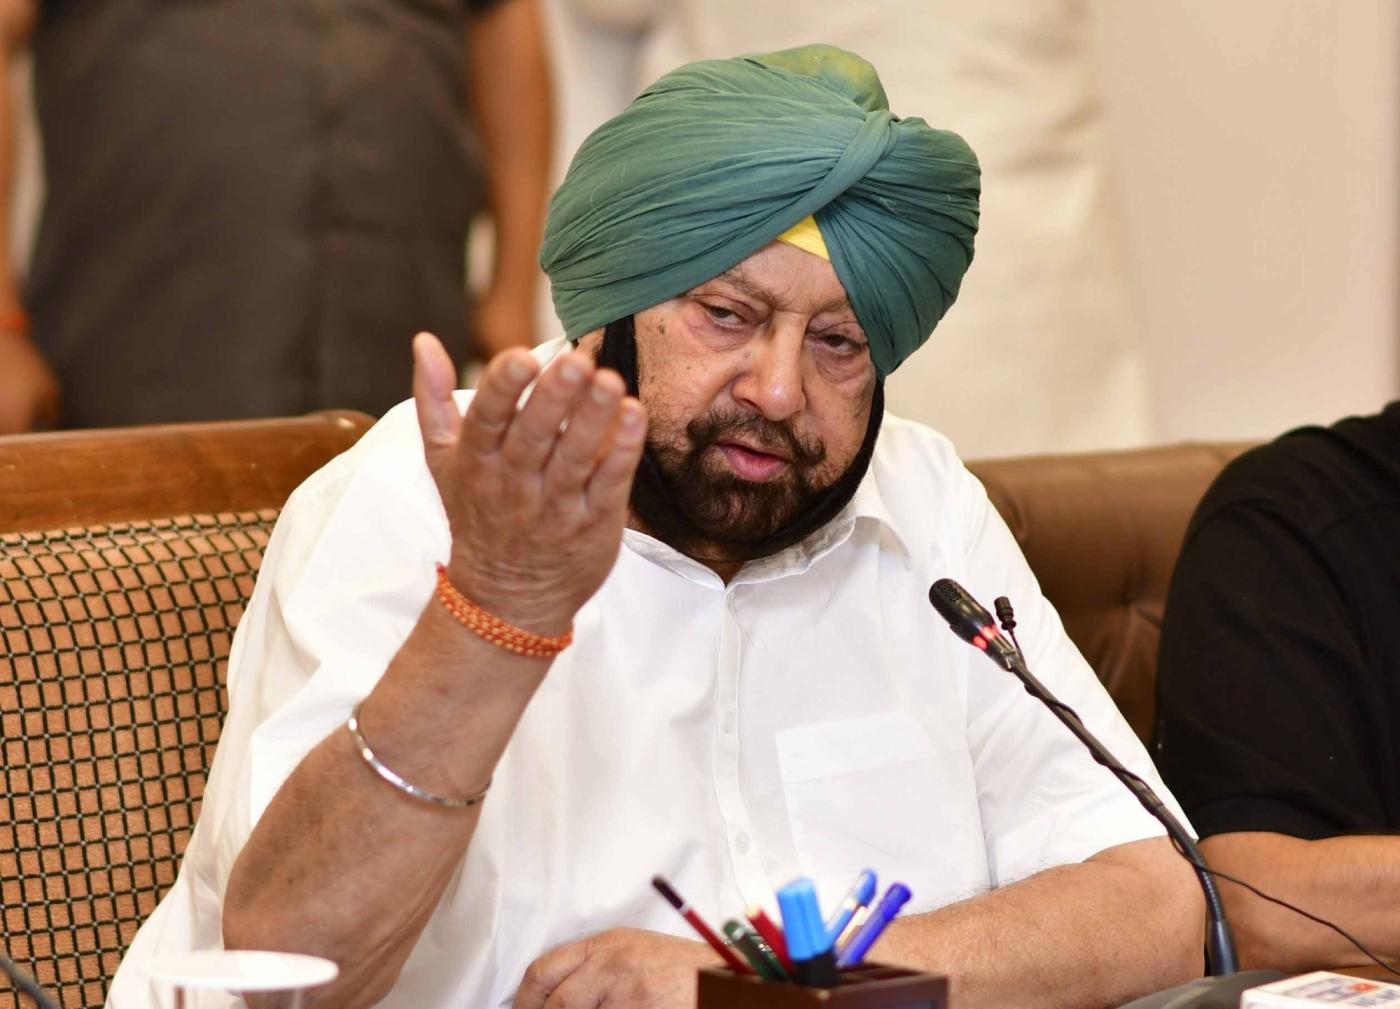 Chandigarh: Punjab Chief Minister Captain Amarinder Singh addresses a press conference in Chandigarh, on May 23, 2019. (Photo: IANS) by .